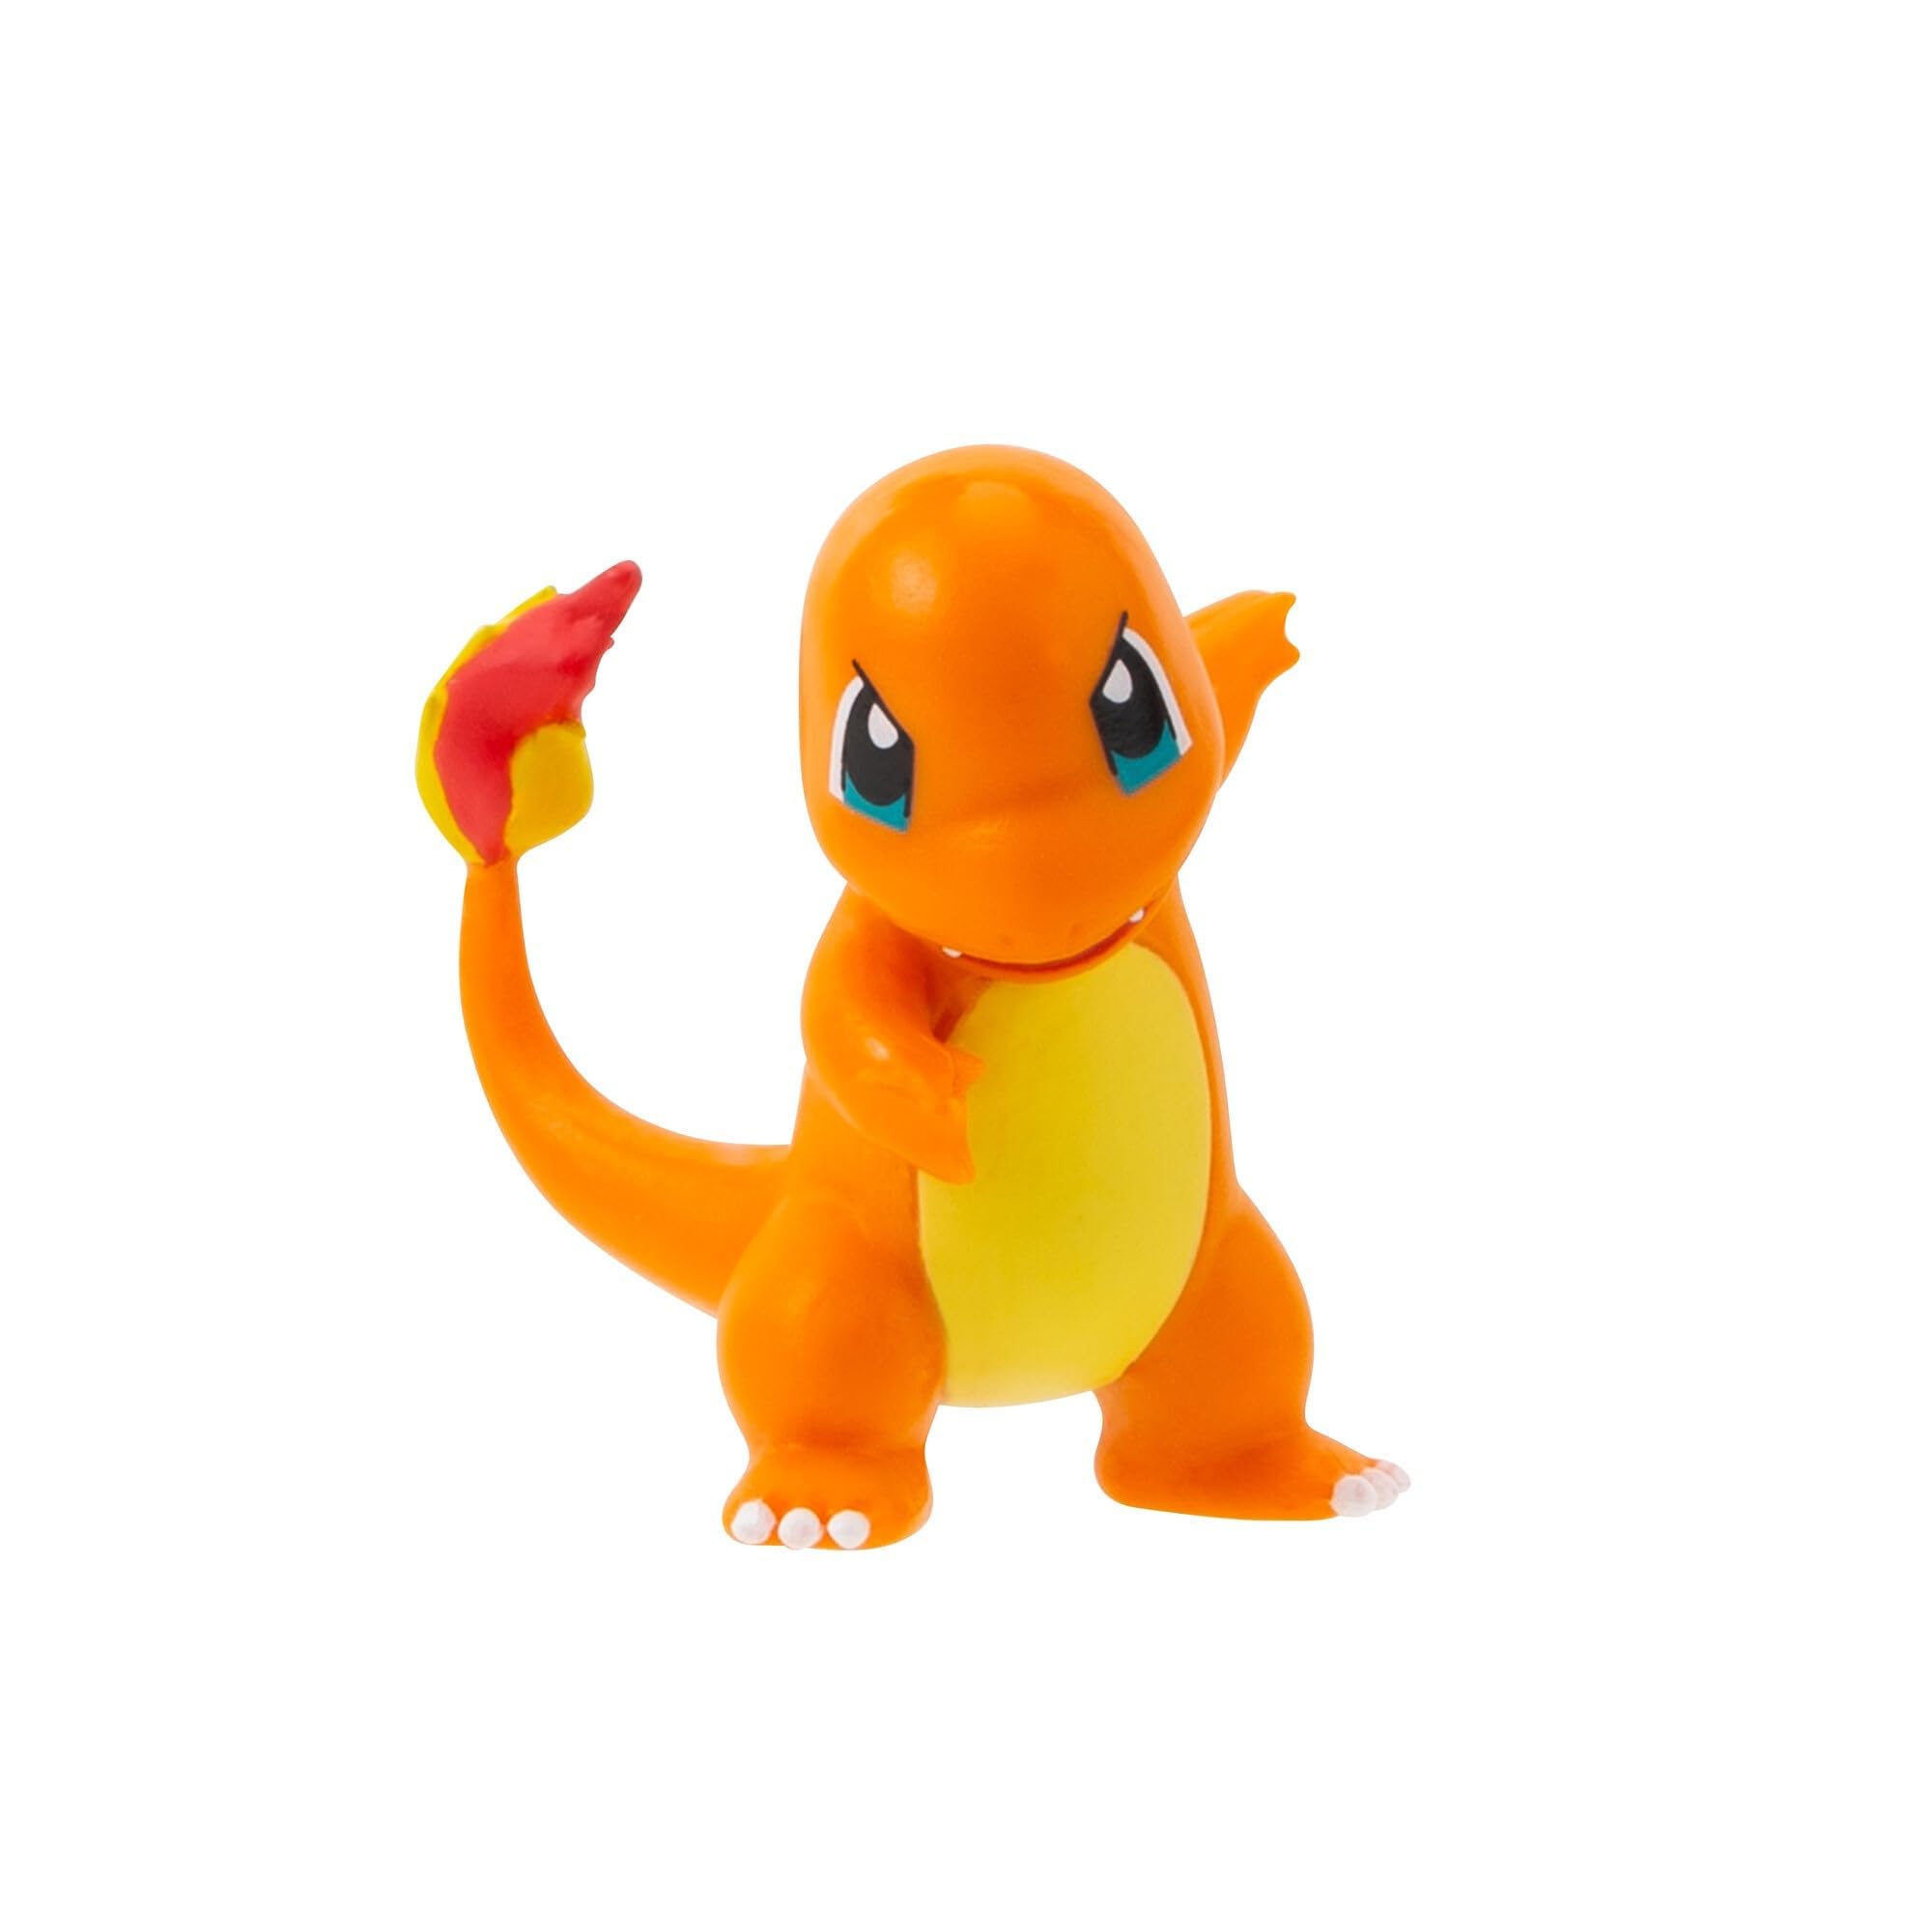 Pokemon Battle Figure 8-Pack - Comes with 2” Pikachu, 2” Bulbasaur, 2” Squirtle, 2” Charmander, 3